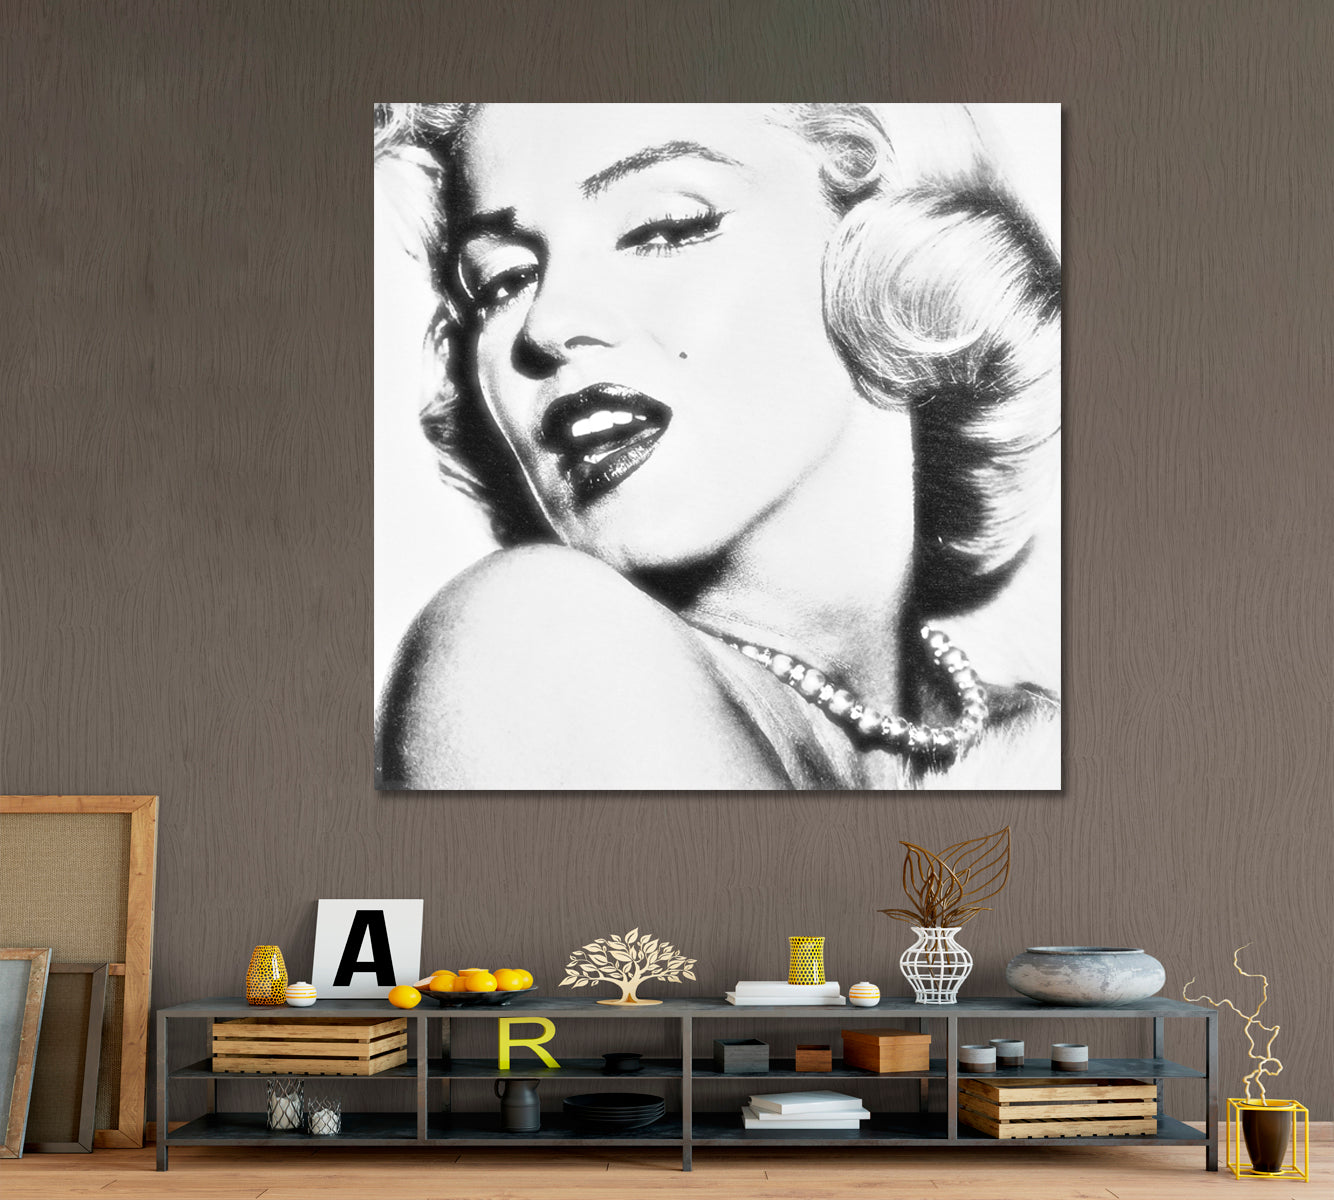 MARILYN MONROE Movie Star Marilyn Monroe Famous Posing Black and White Vinage - Square Panel Celebs Canvas Print Artesty   